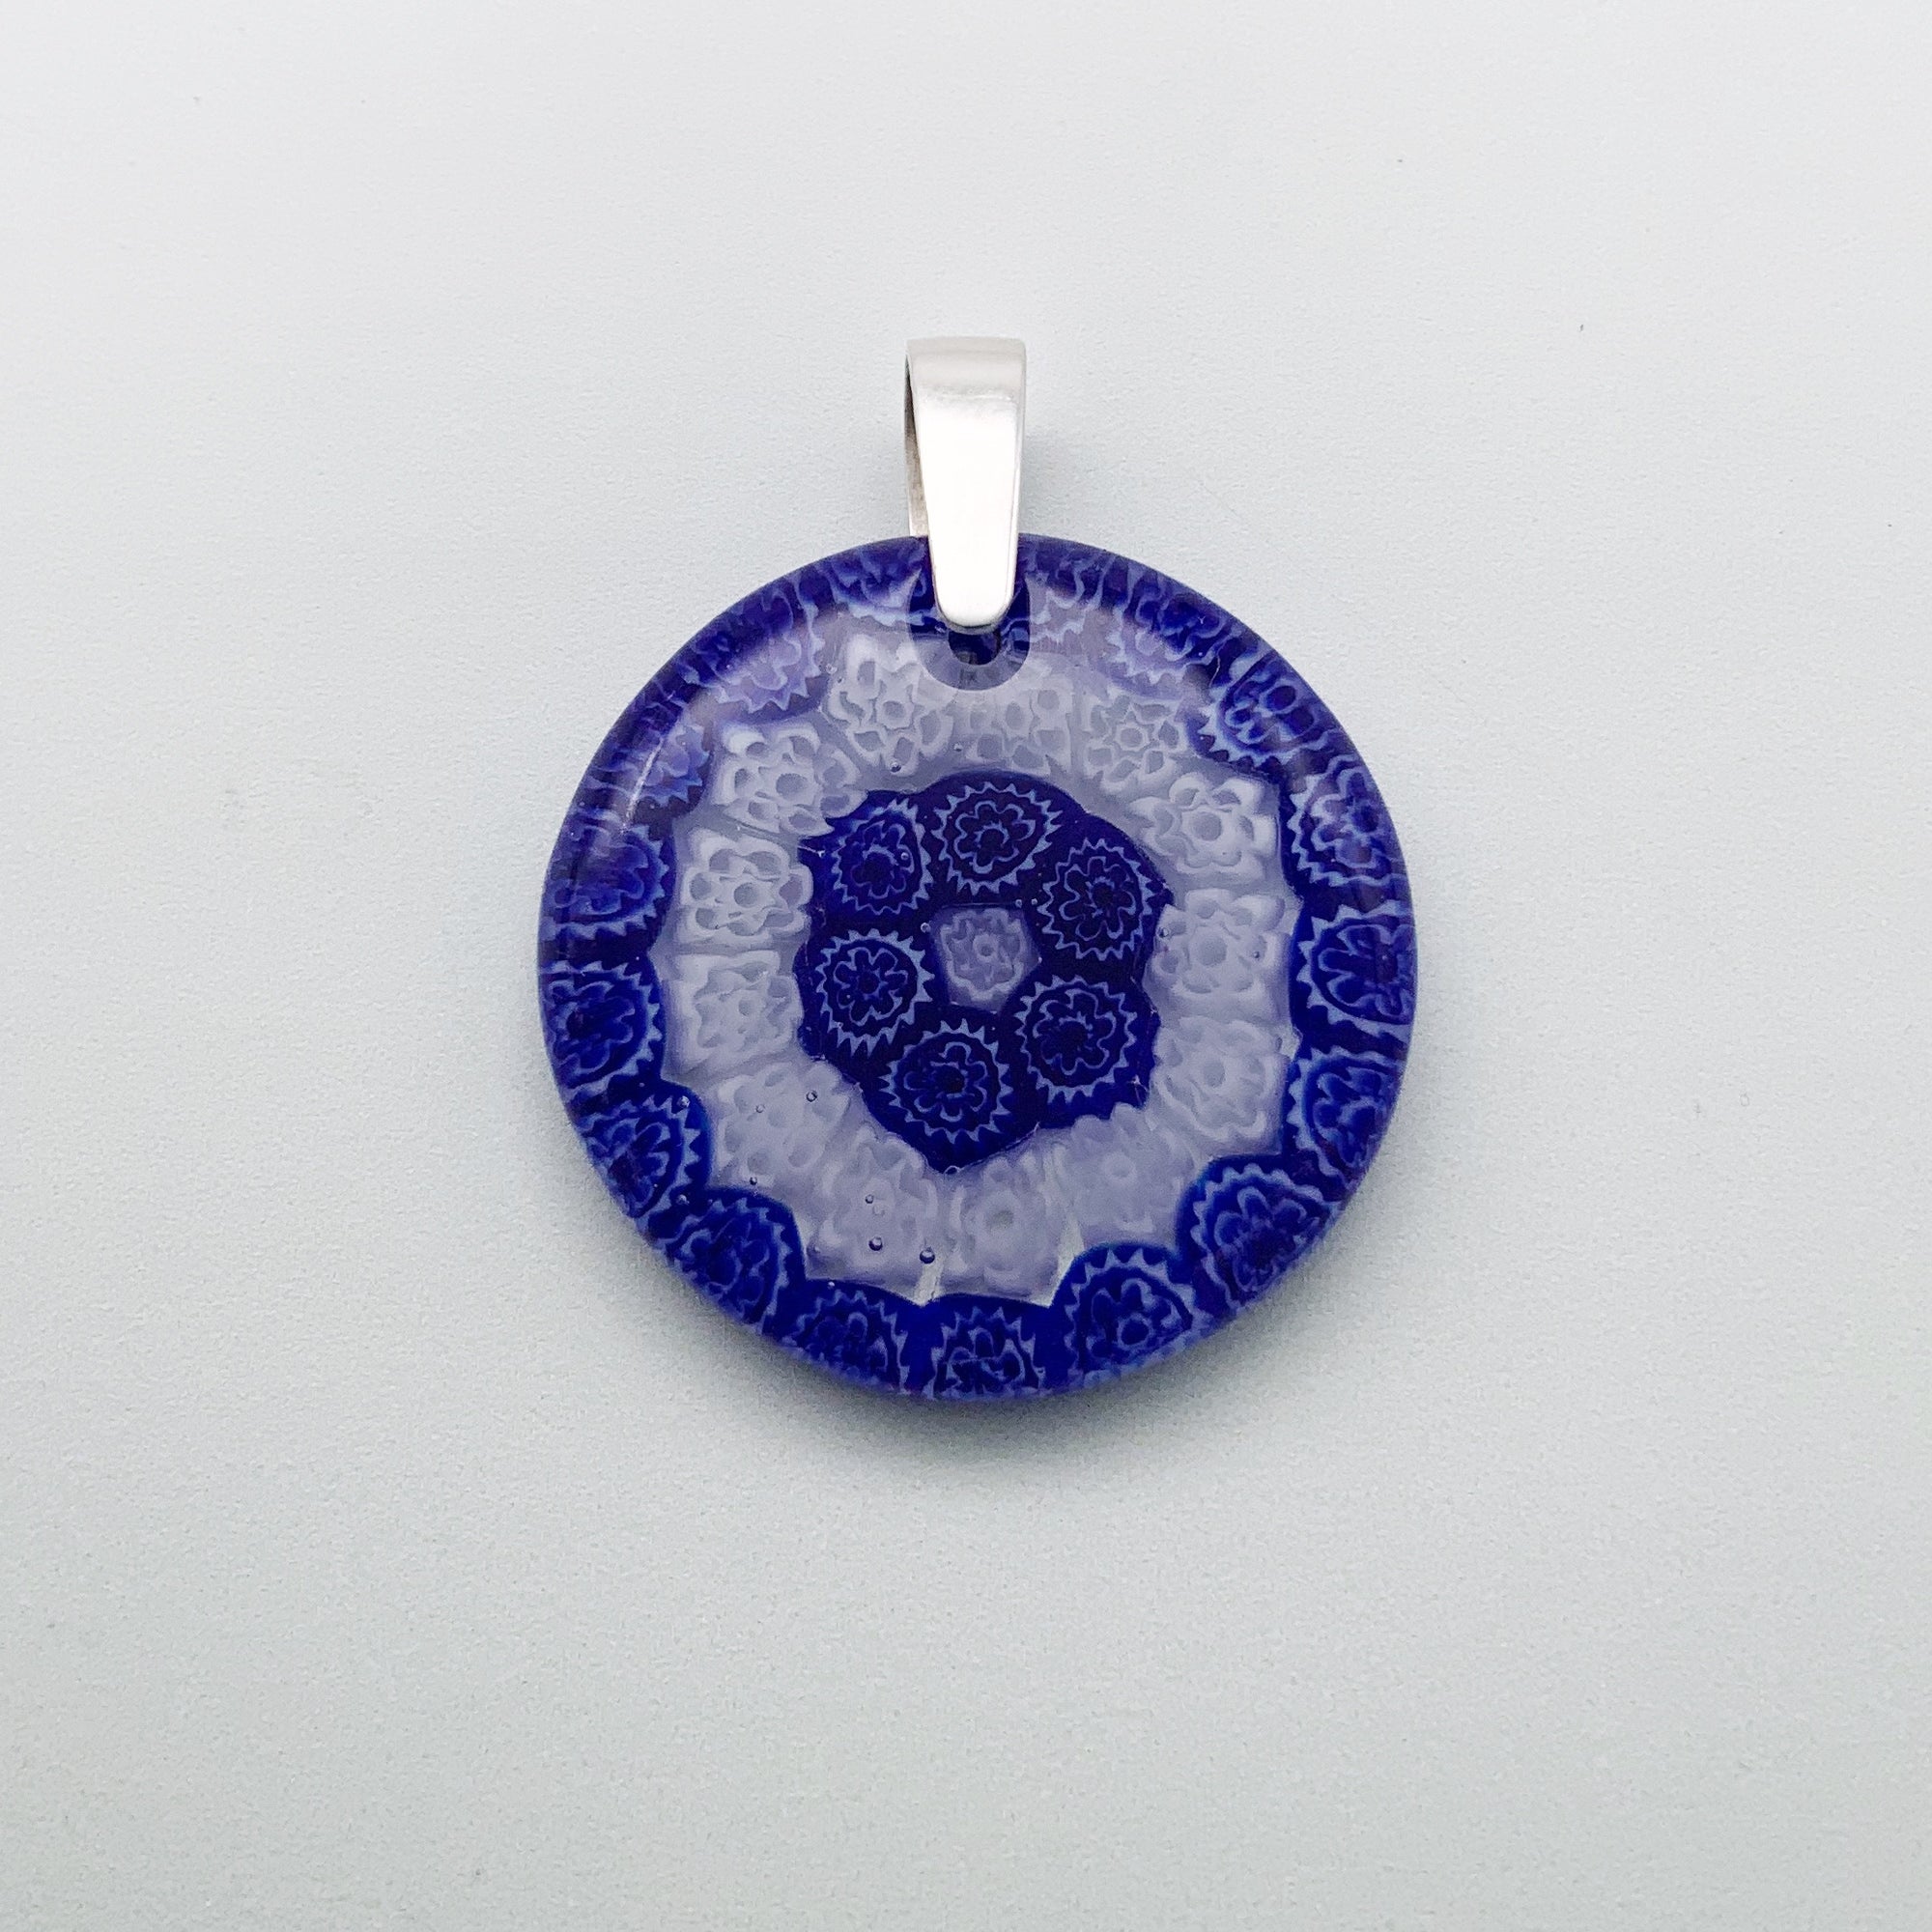 Fused millefiori glass pendant in navy and white fleurettes - 35mm round